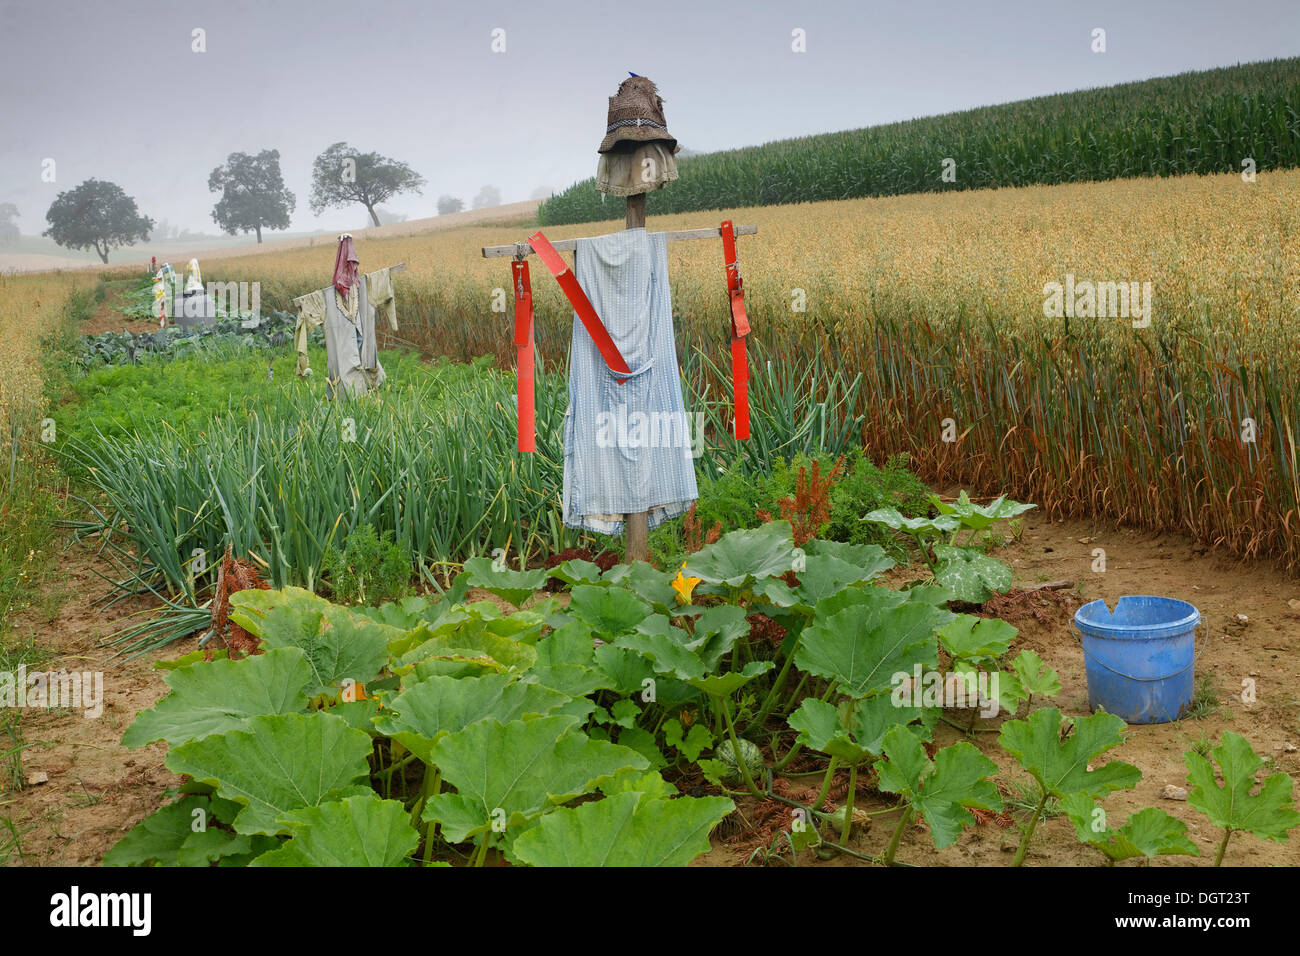 Scarecrow On A Field High Resolution Stock Photography and Images - Alamy